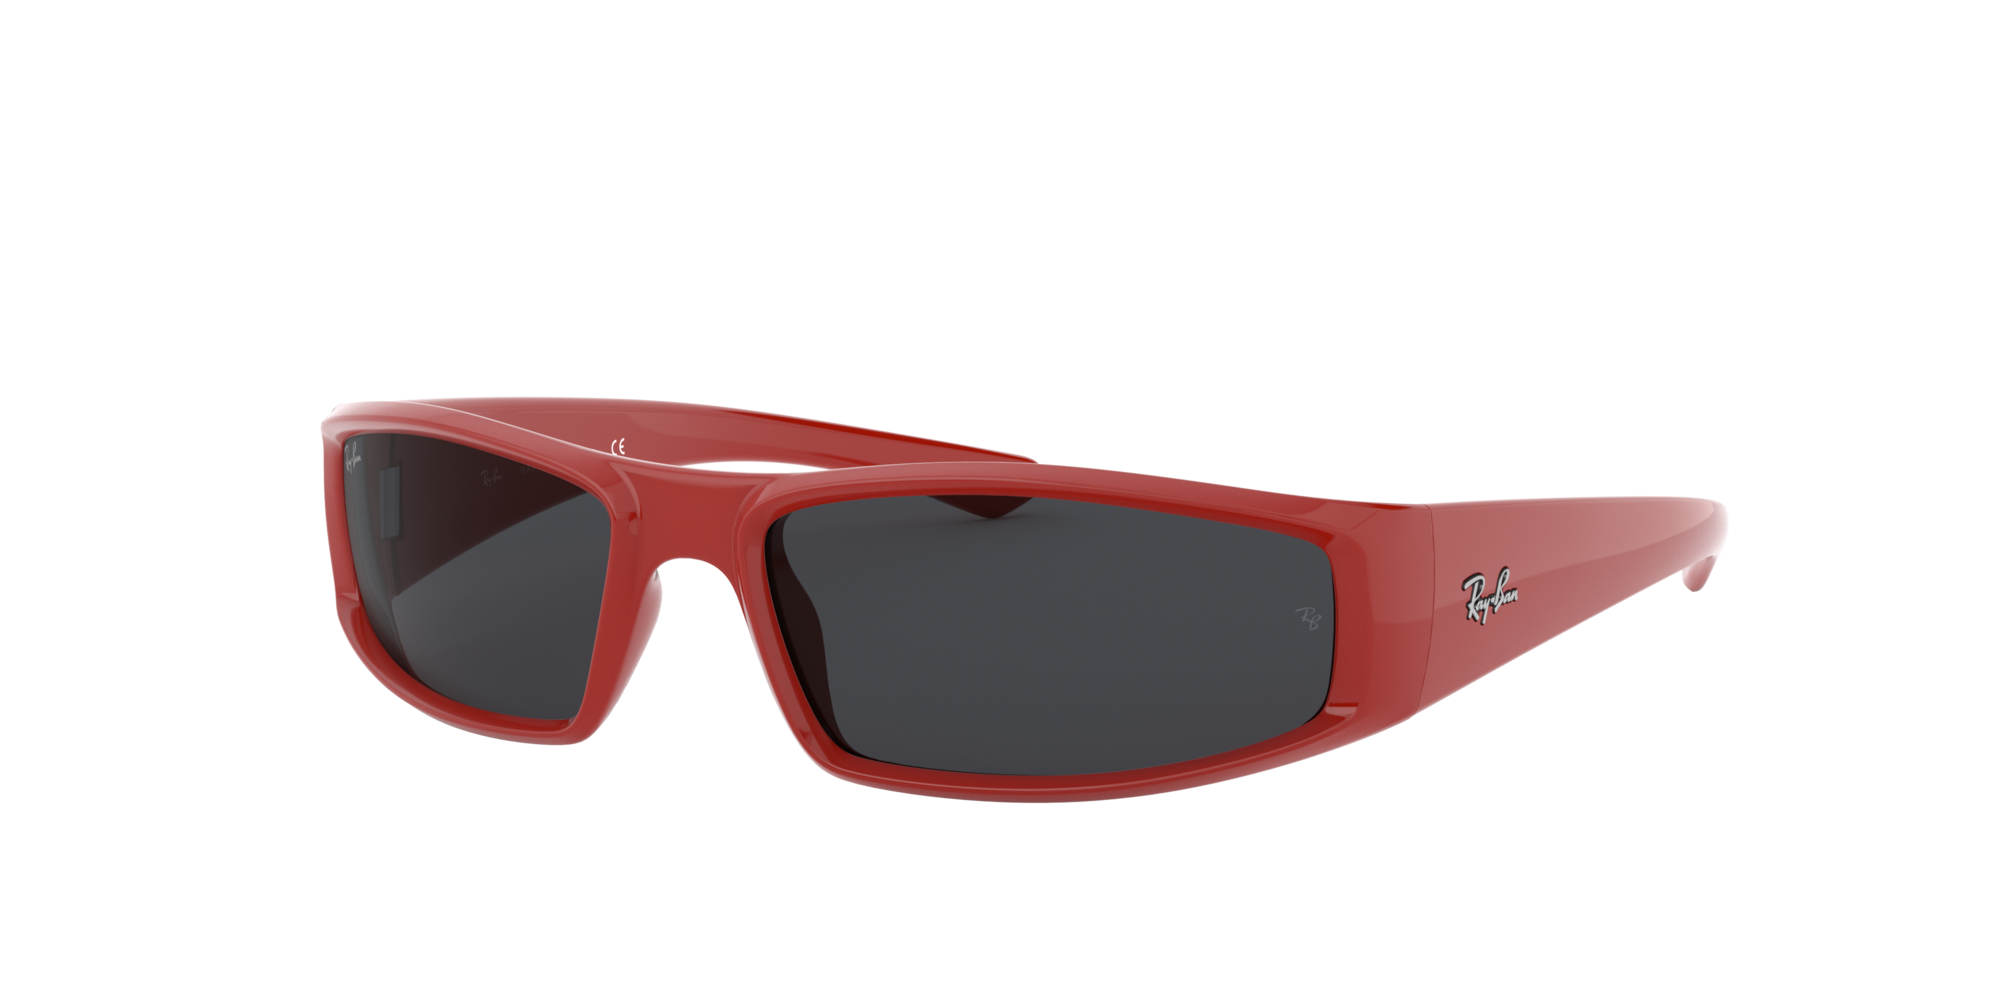 black and red ray ban sunglasses